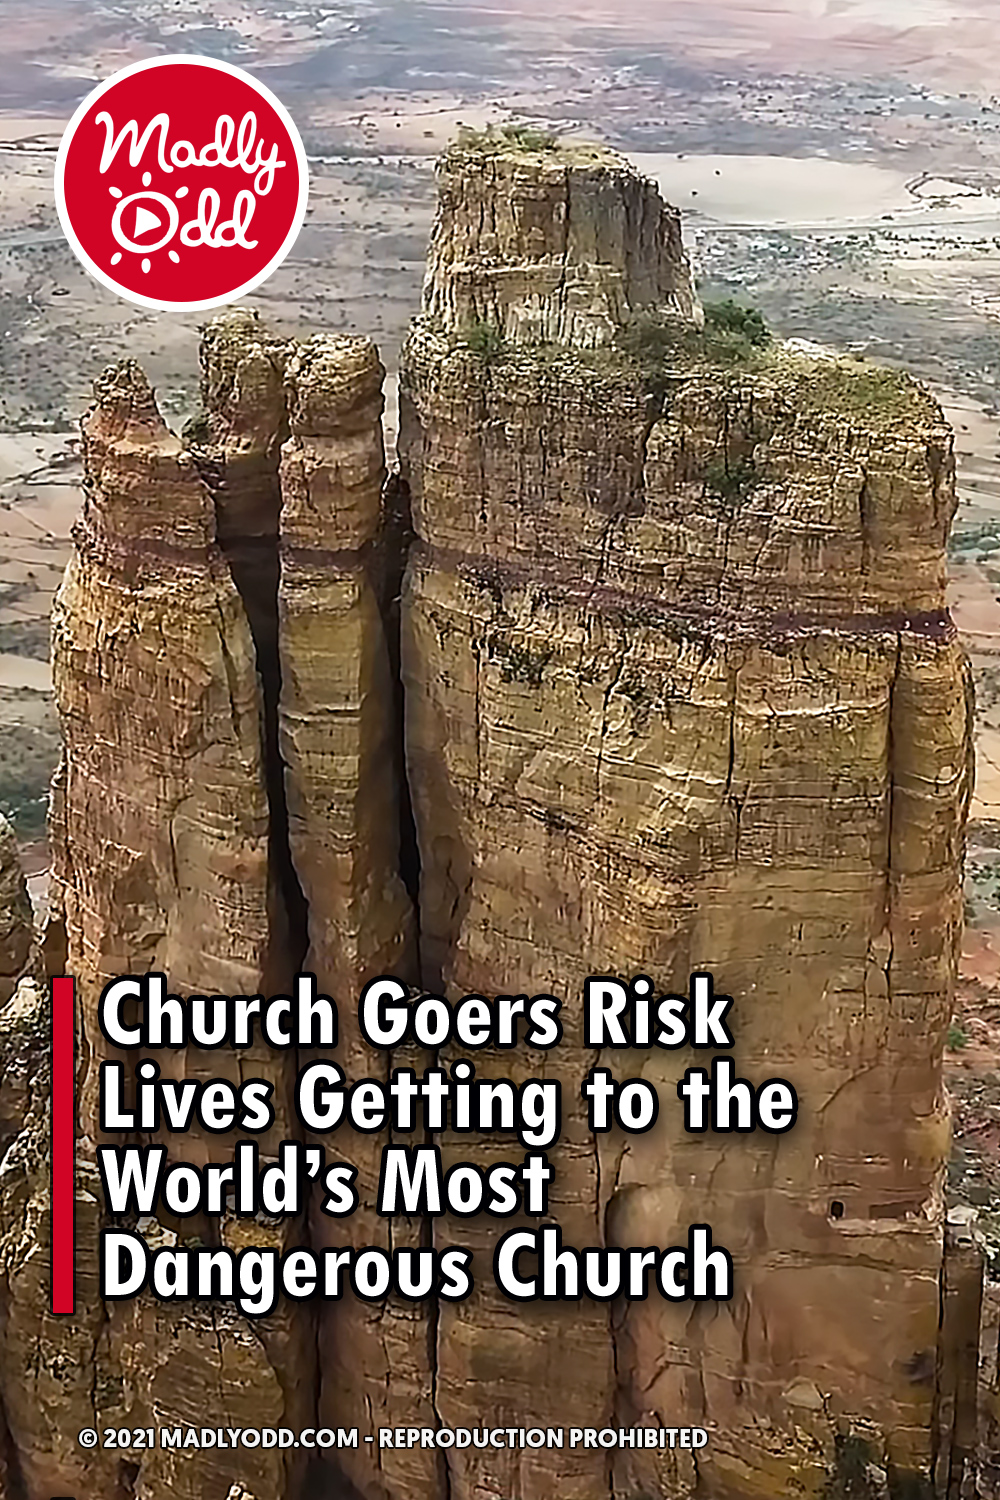 Church Goers Risk Lives Getting to the World’s Most Dangerous Church